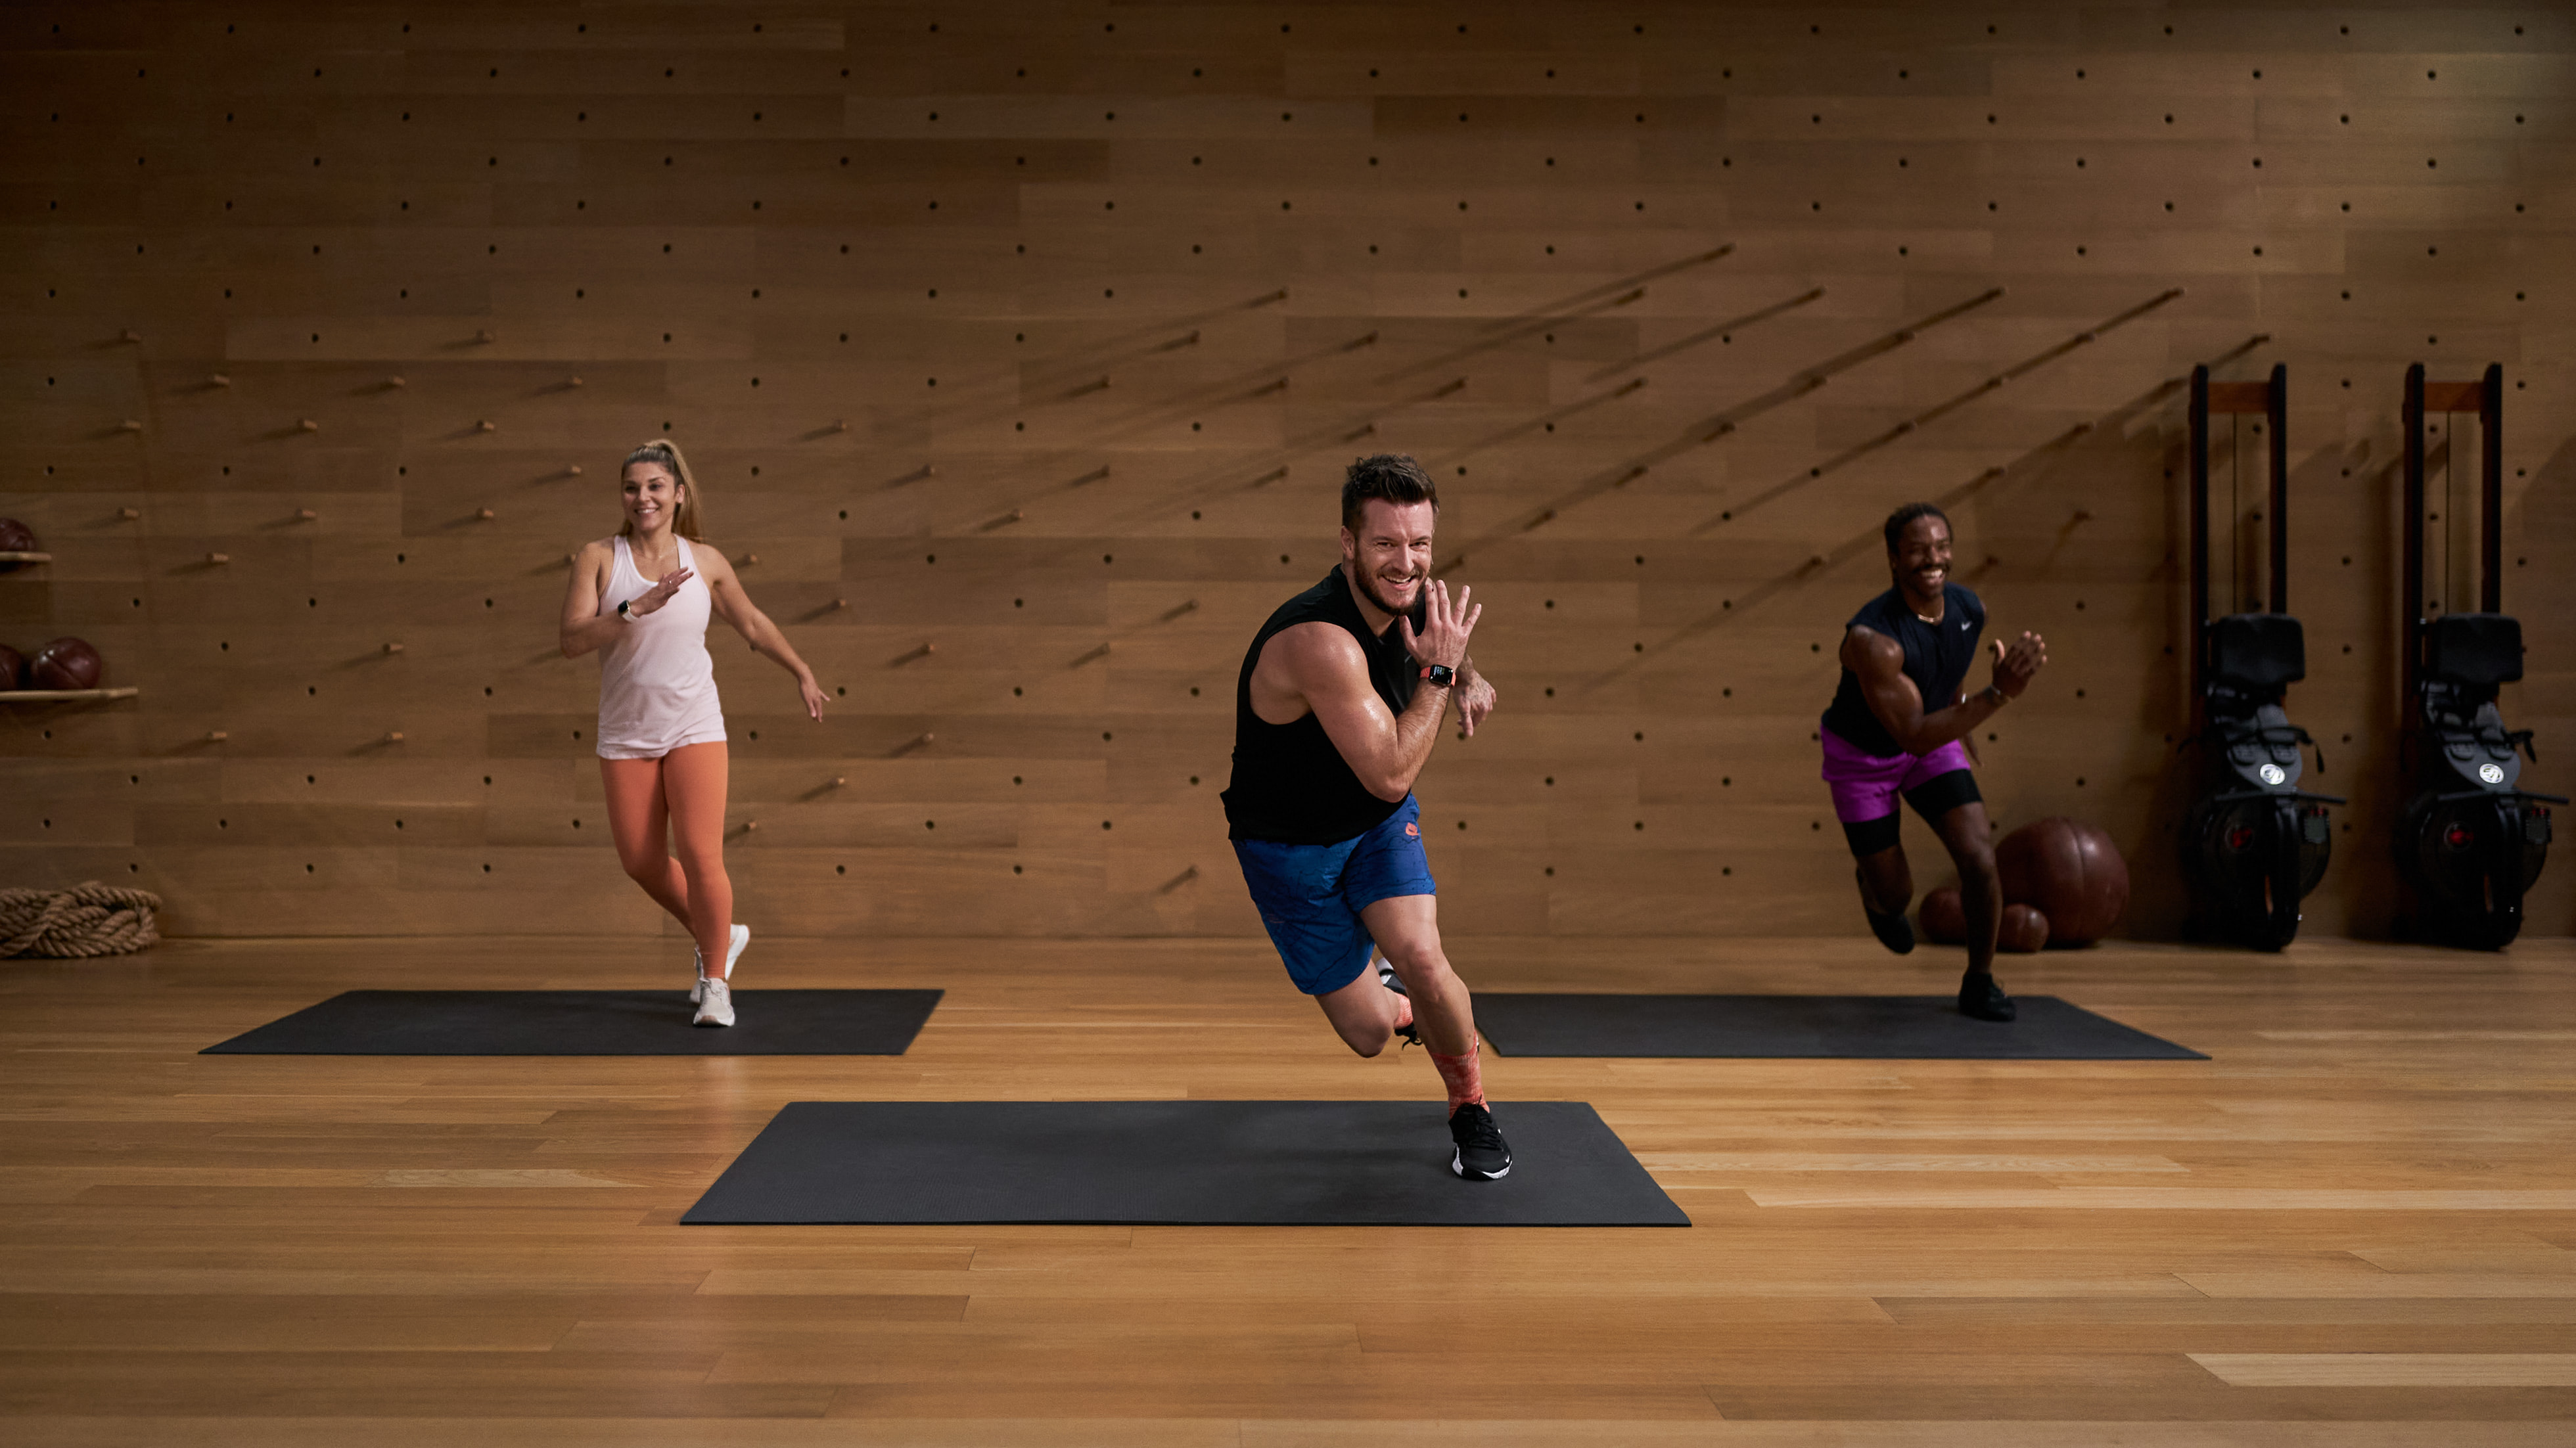 Apple Fitness+ unveils new offerings for the new year - Apple